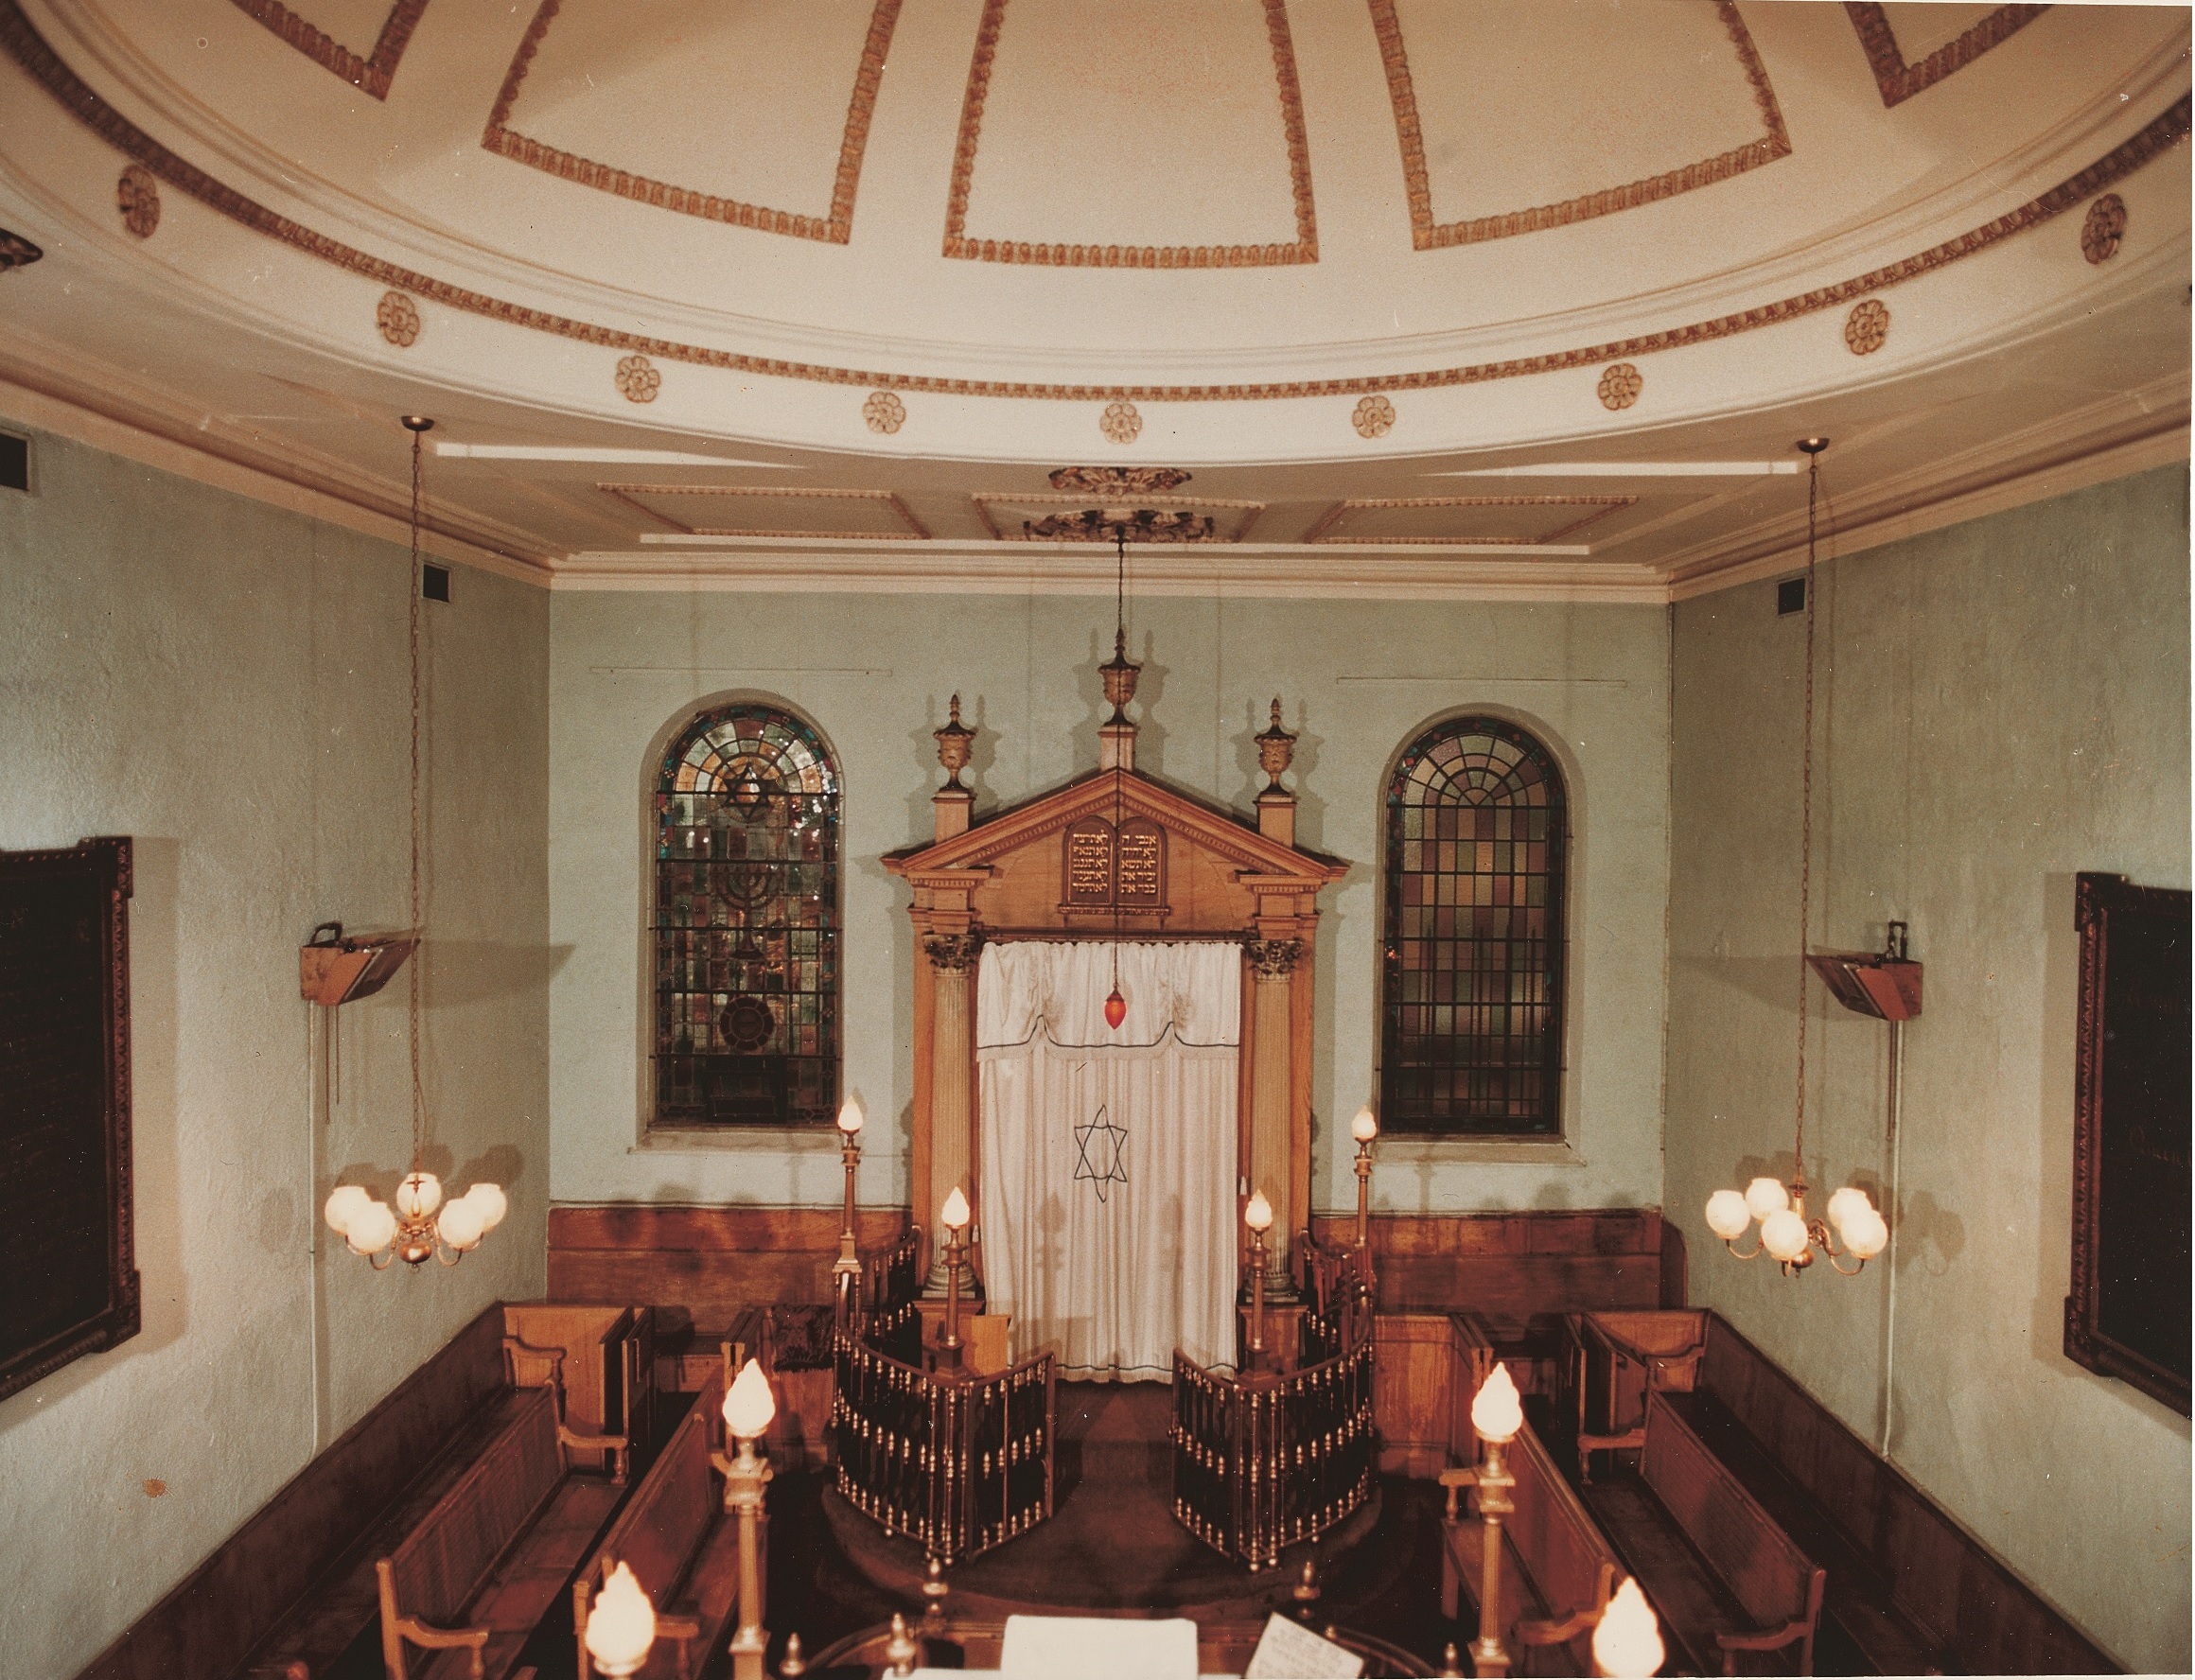 Photograph of synagogue with pale walls, high ceilings, wooden benches and a large white ark.